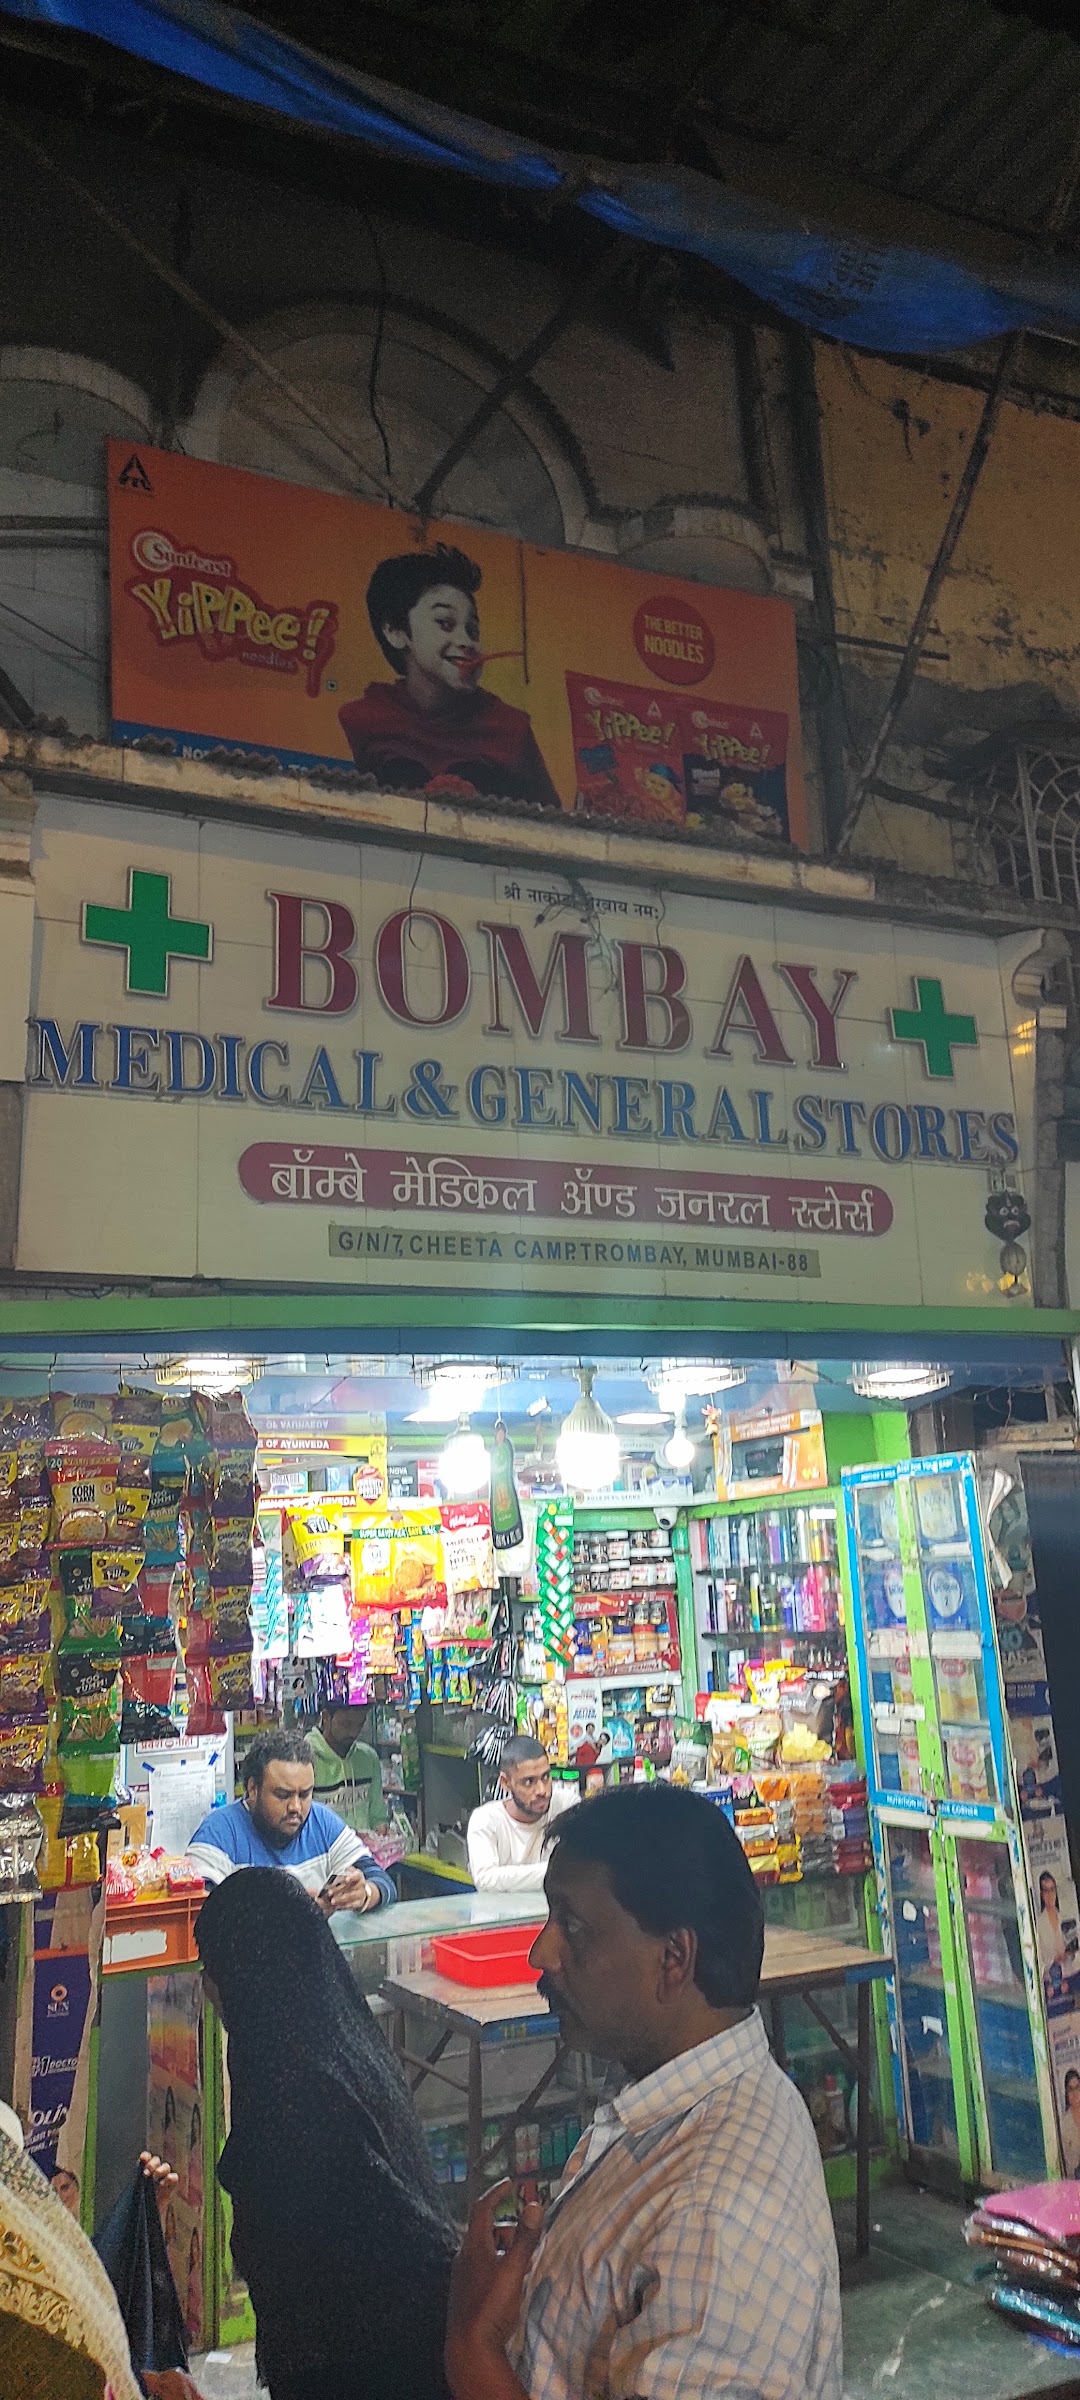 The Bombay Medical